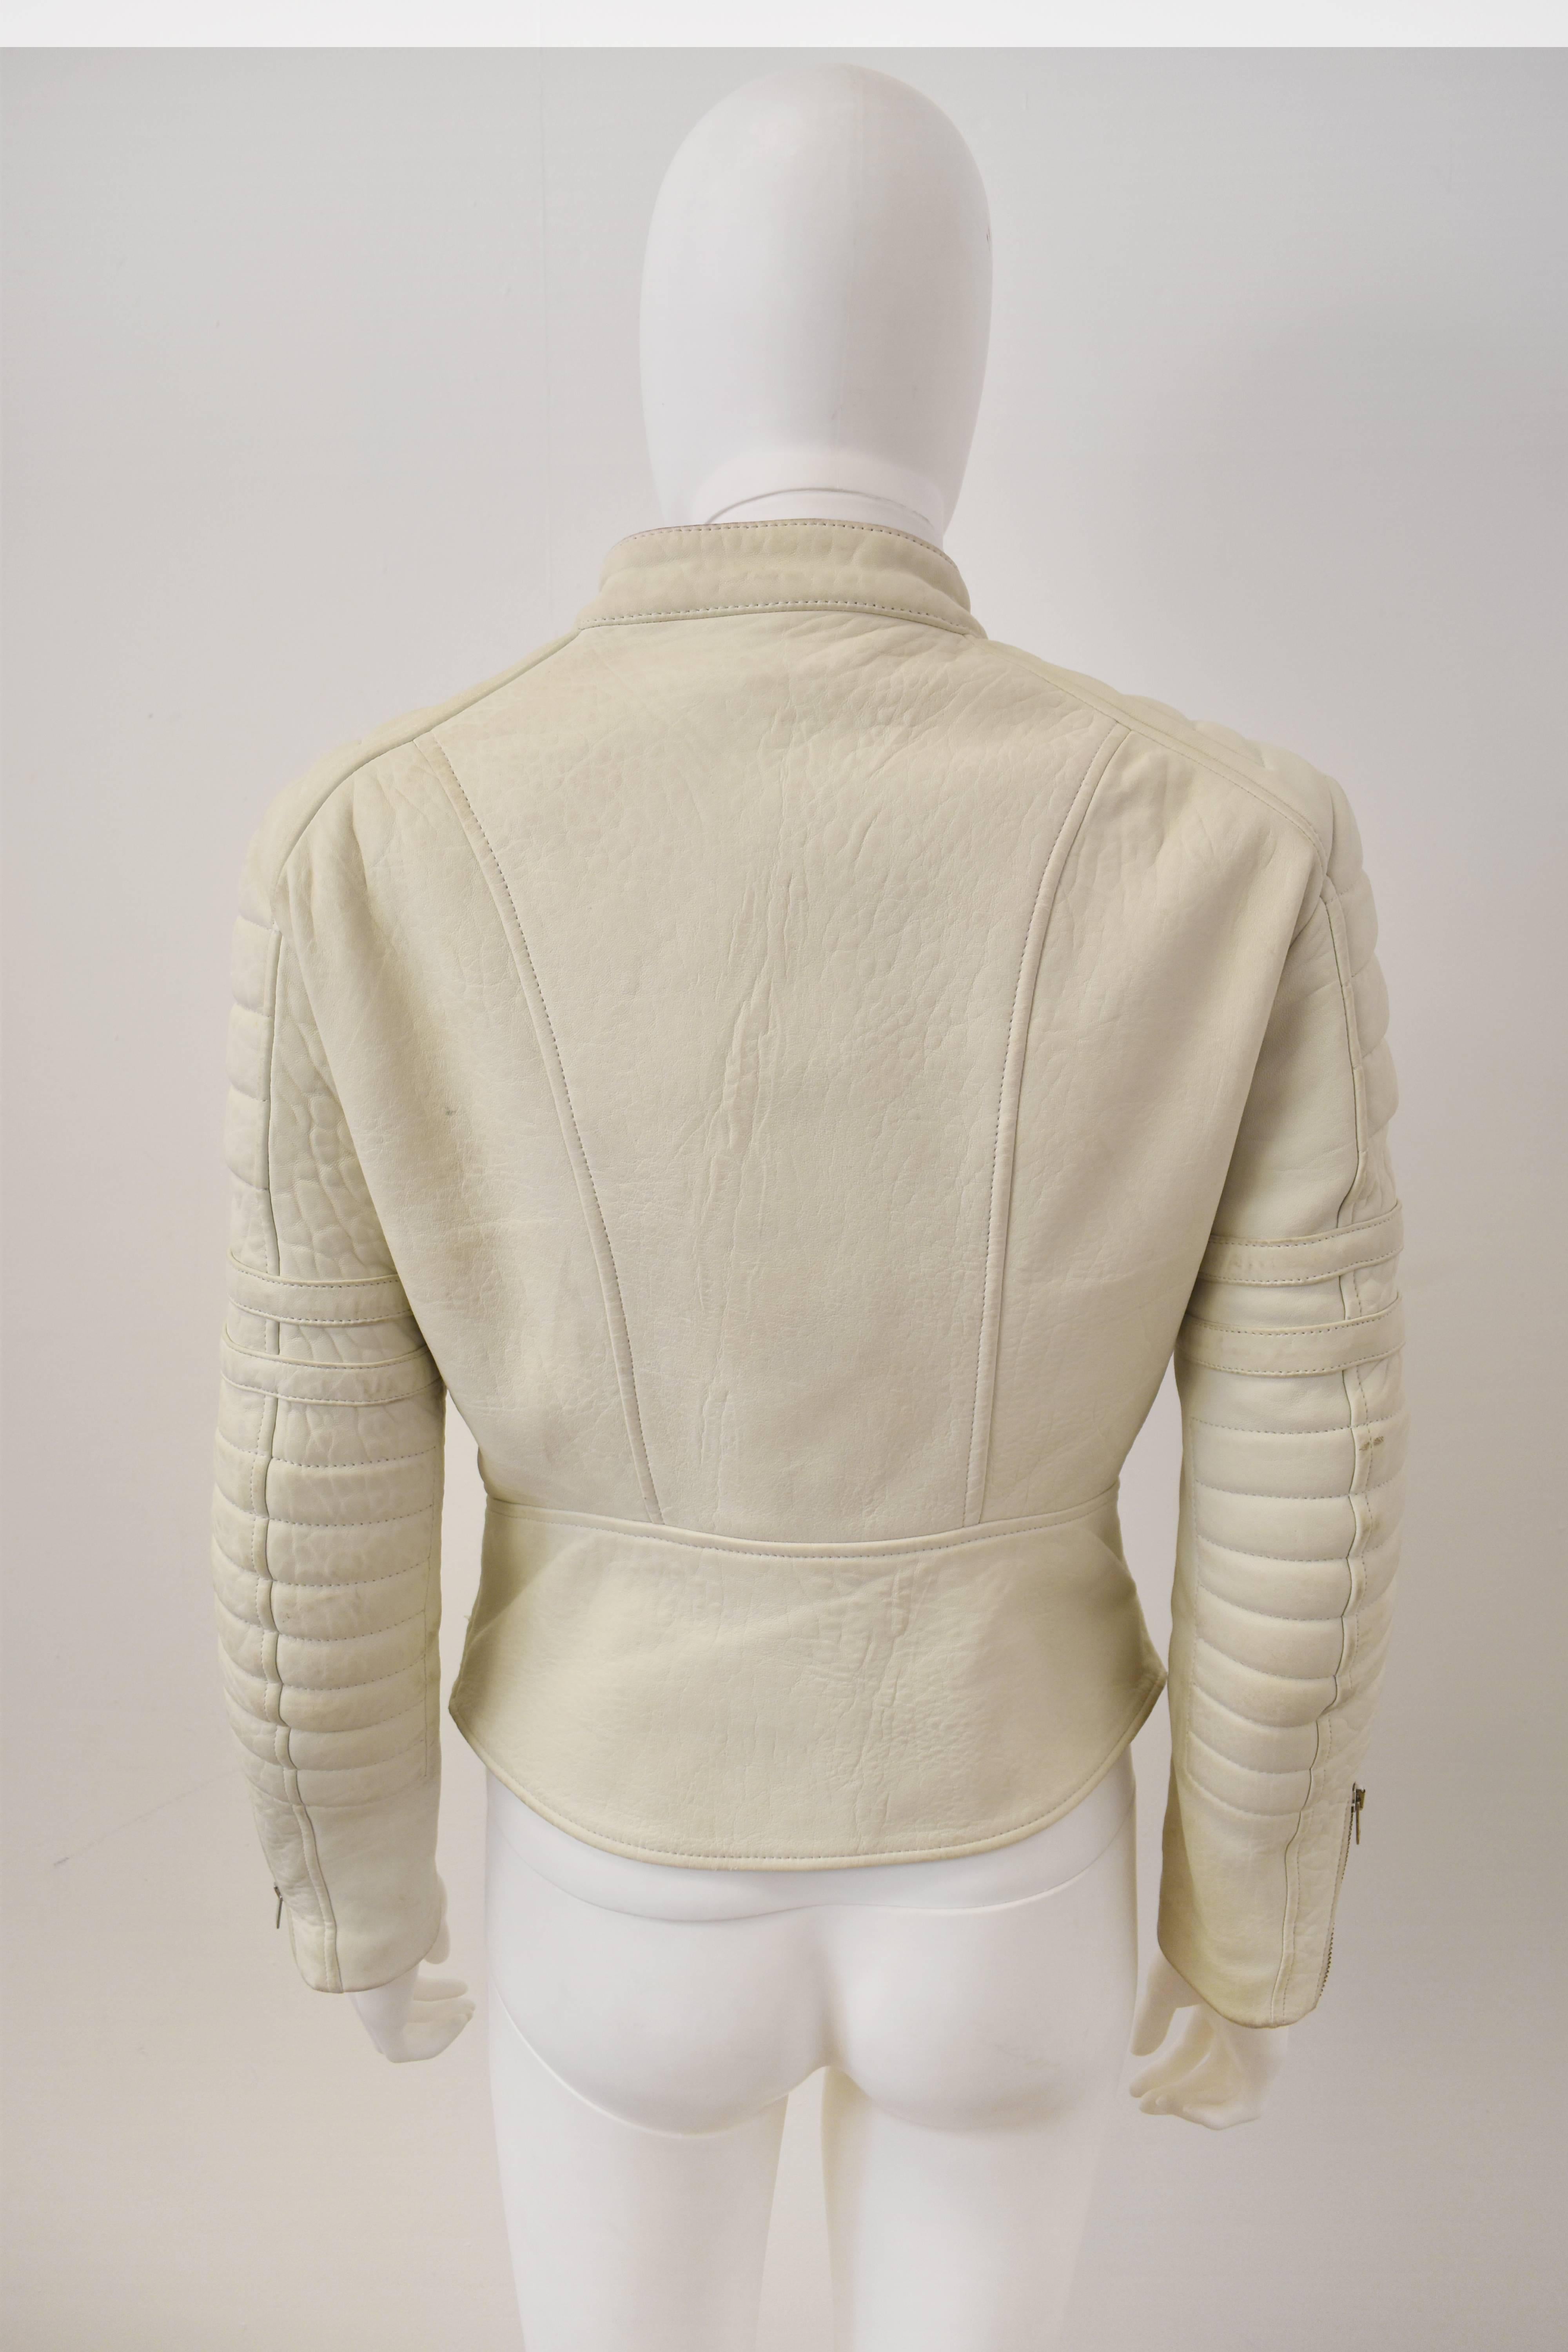 Beige Celine Cream Leather Biker Jacket with Padding and Hardware Details A/W 2010